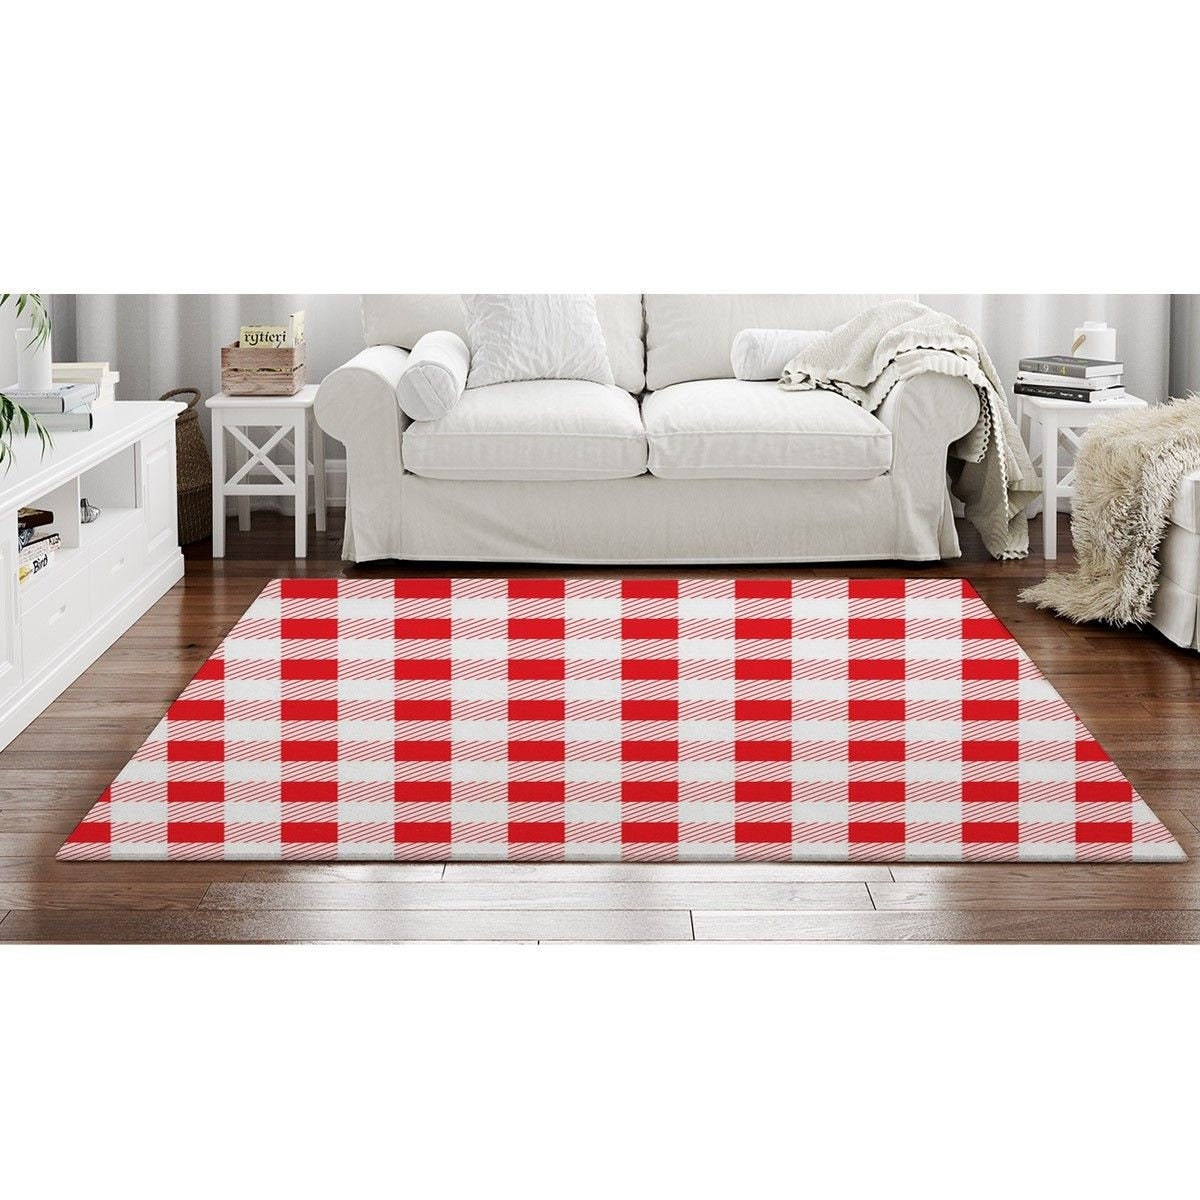 Empirisk Indsigtsfuld Ciro Red and White Gingham Decor Area Rug Gingham Rug Red and White - Etsy